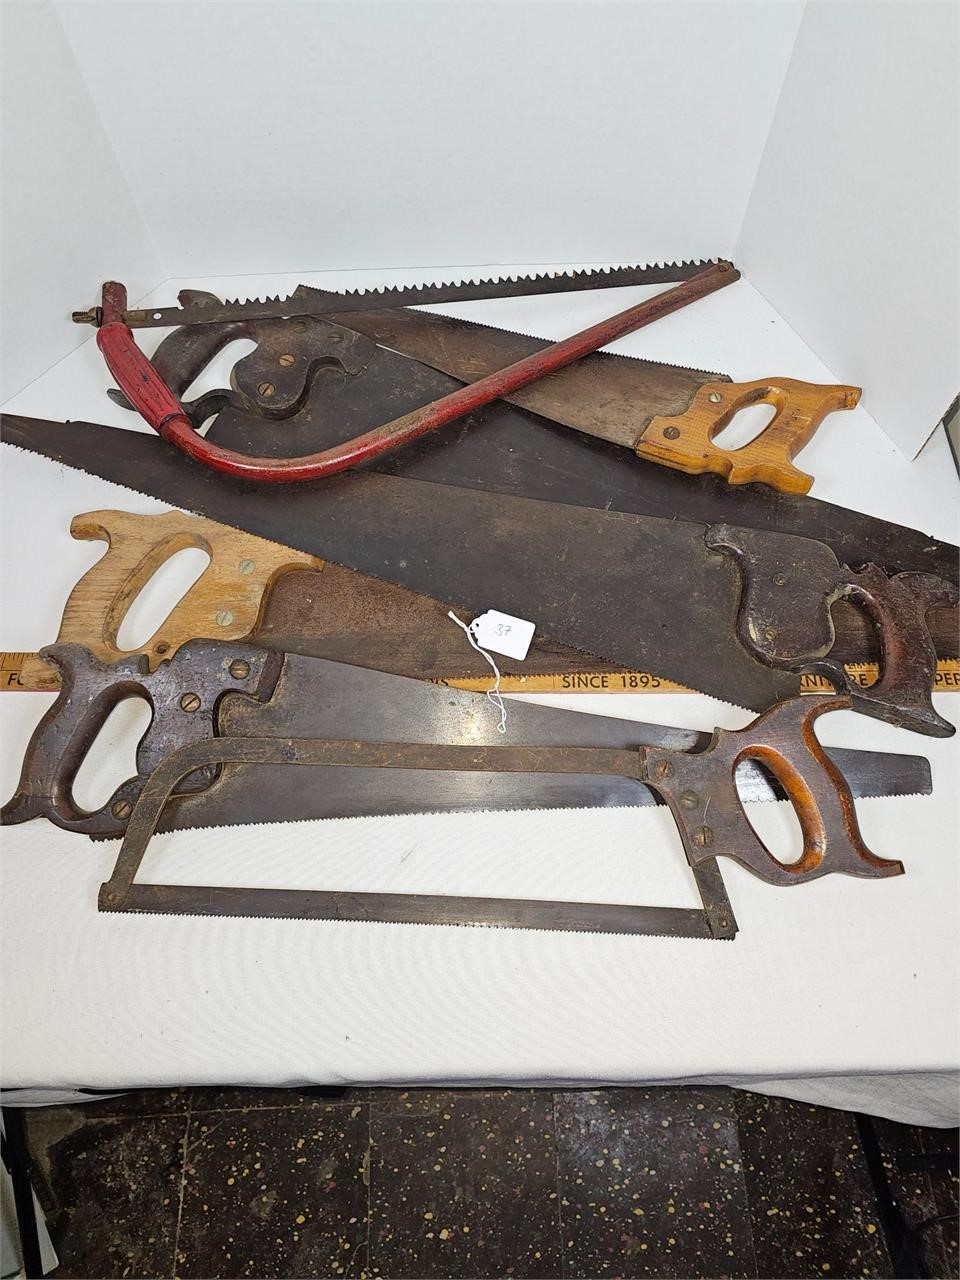 Assortment of Saws Most are Old Wood Handled